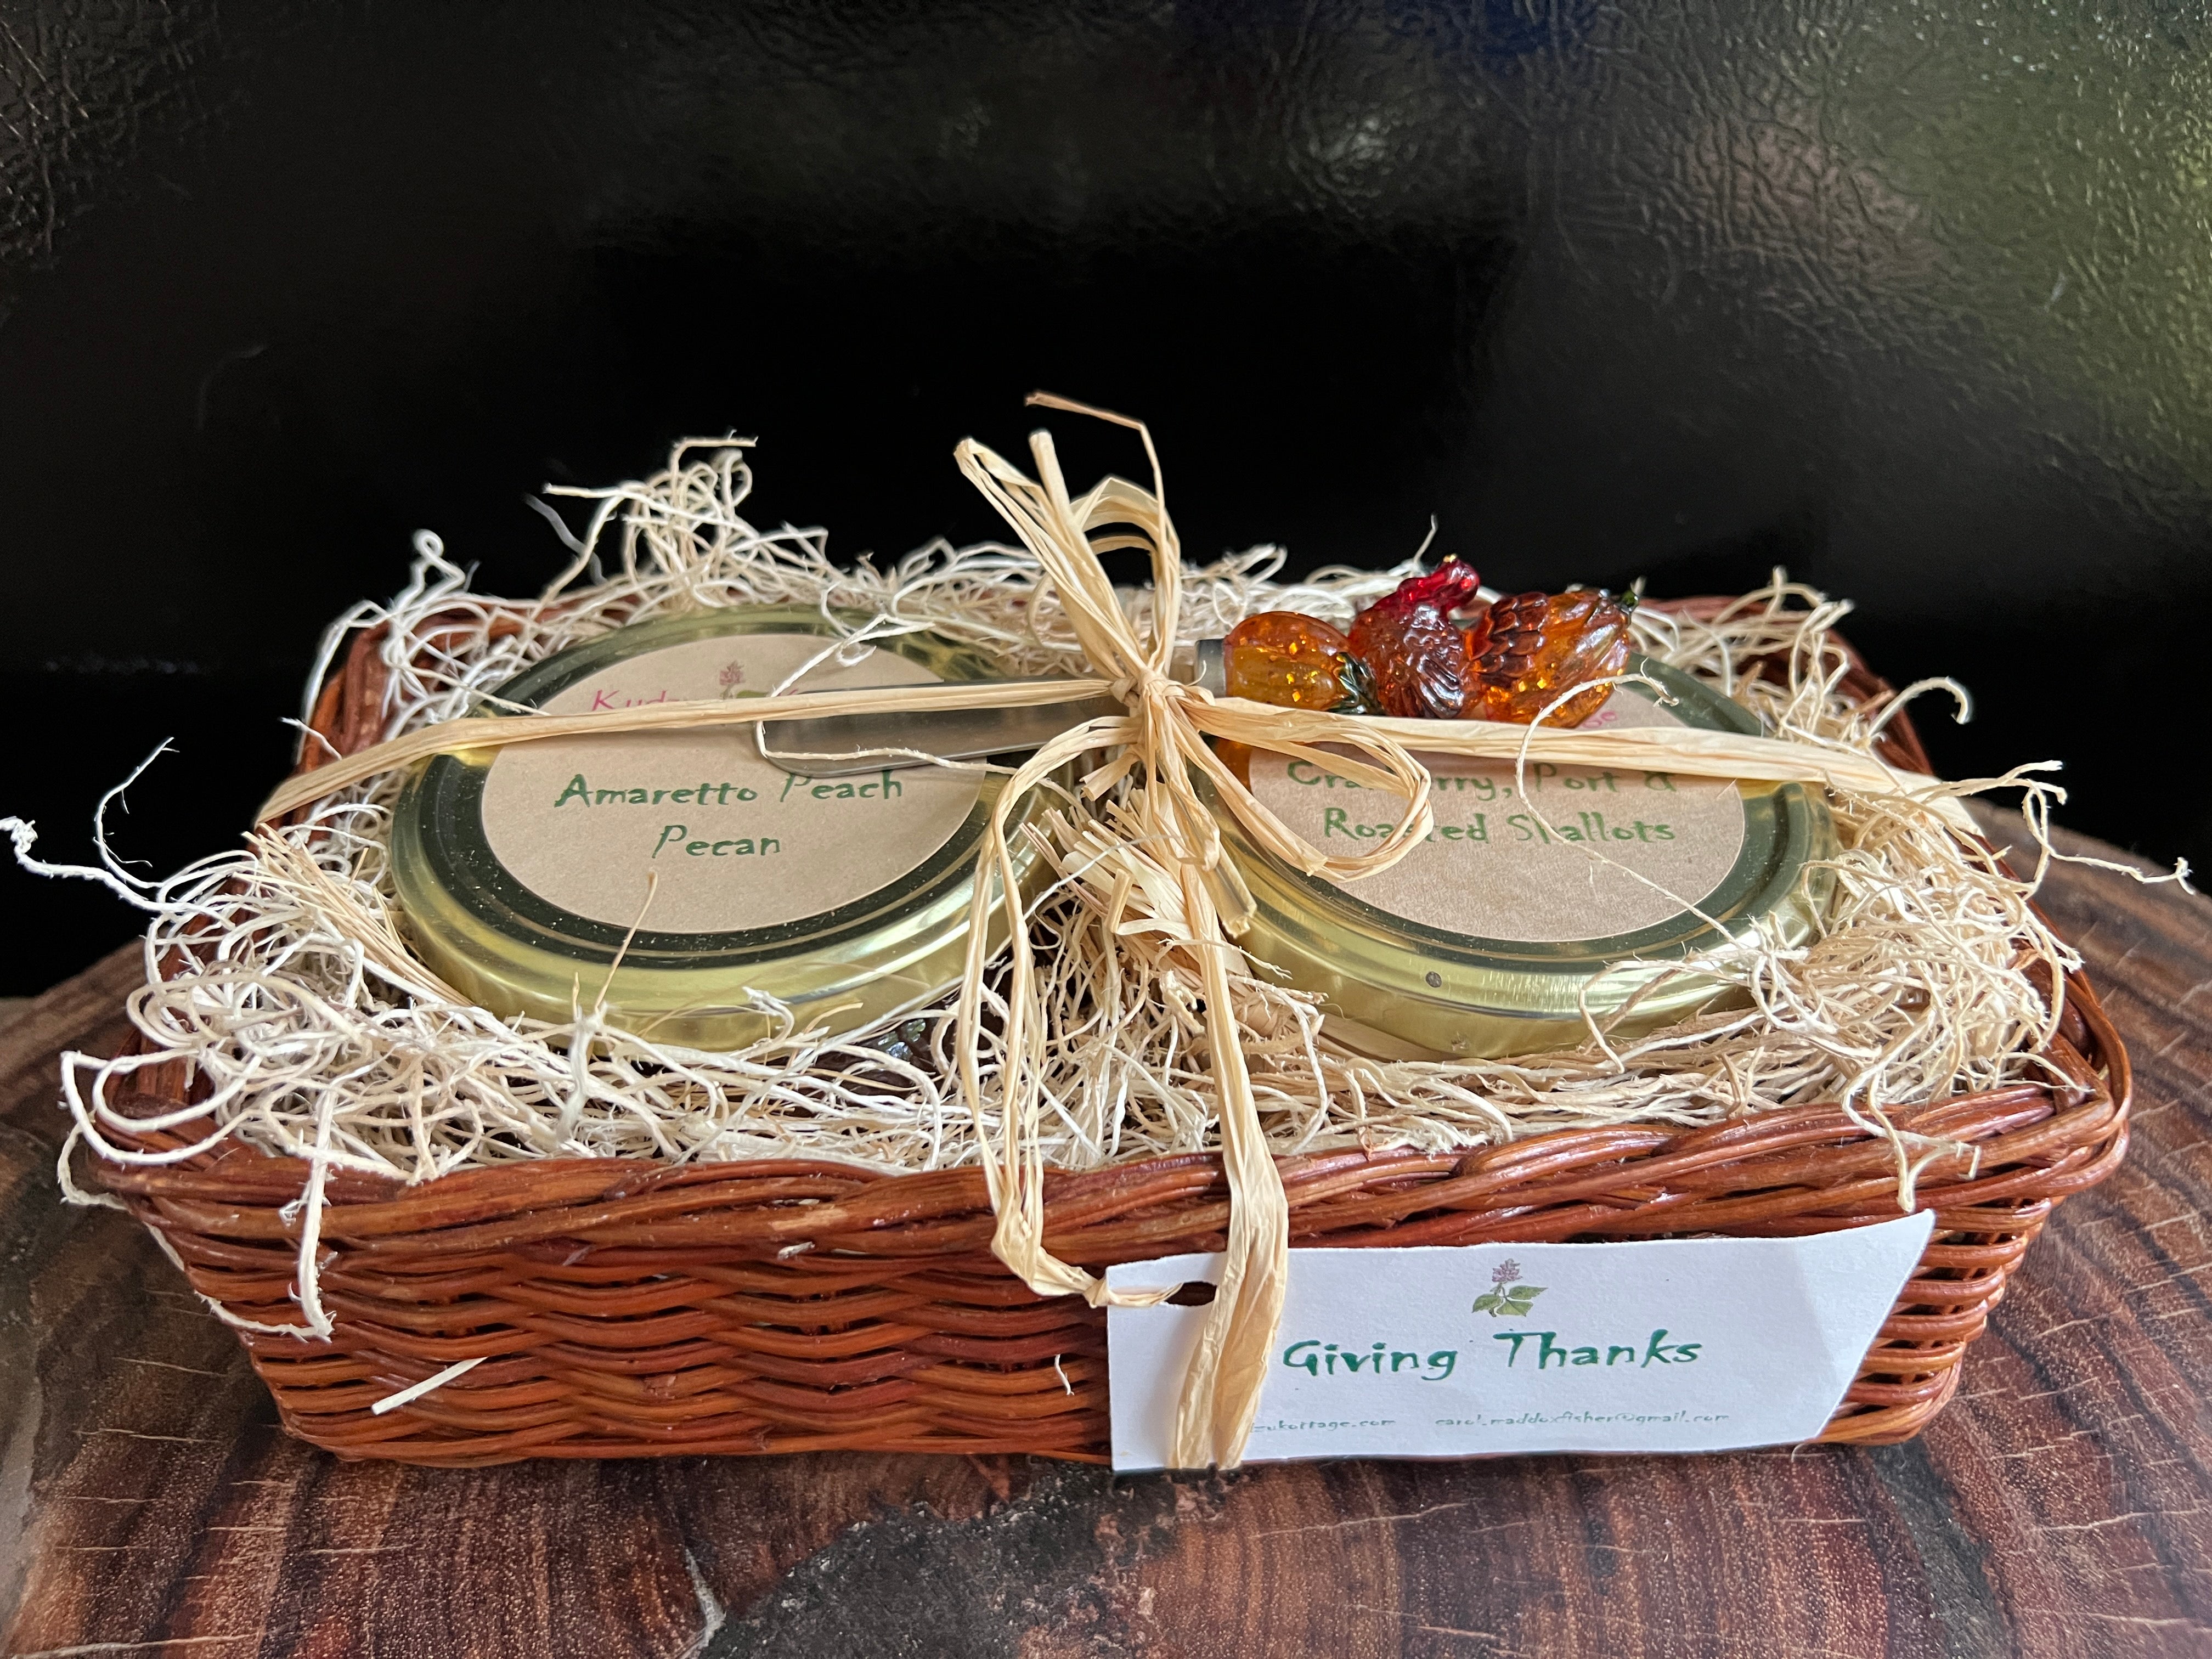 Giving Thanks Basket Gift Crate